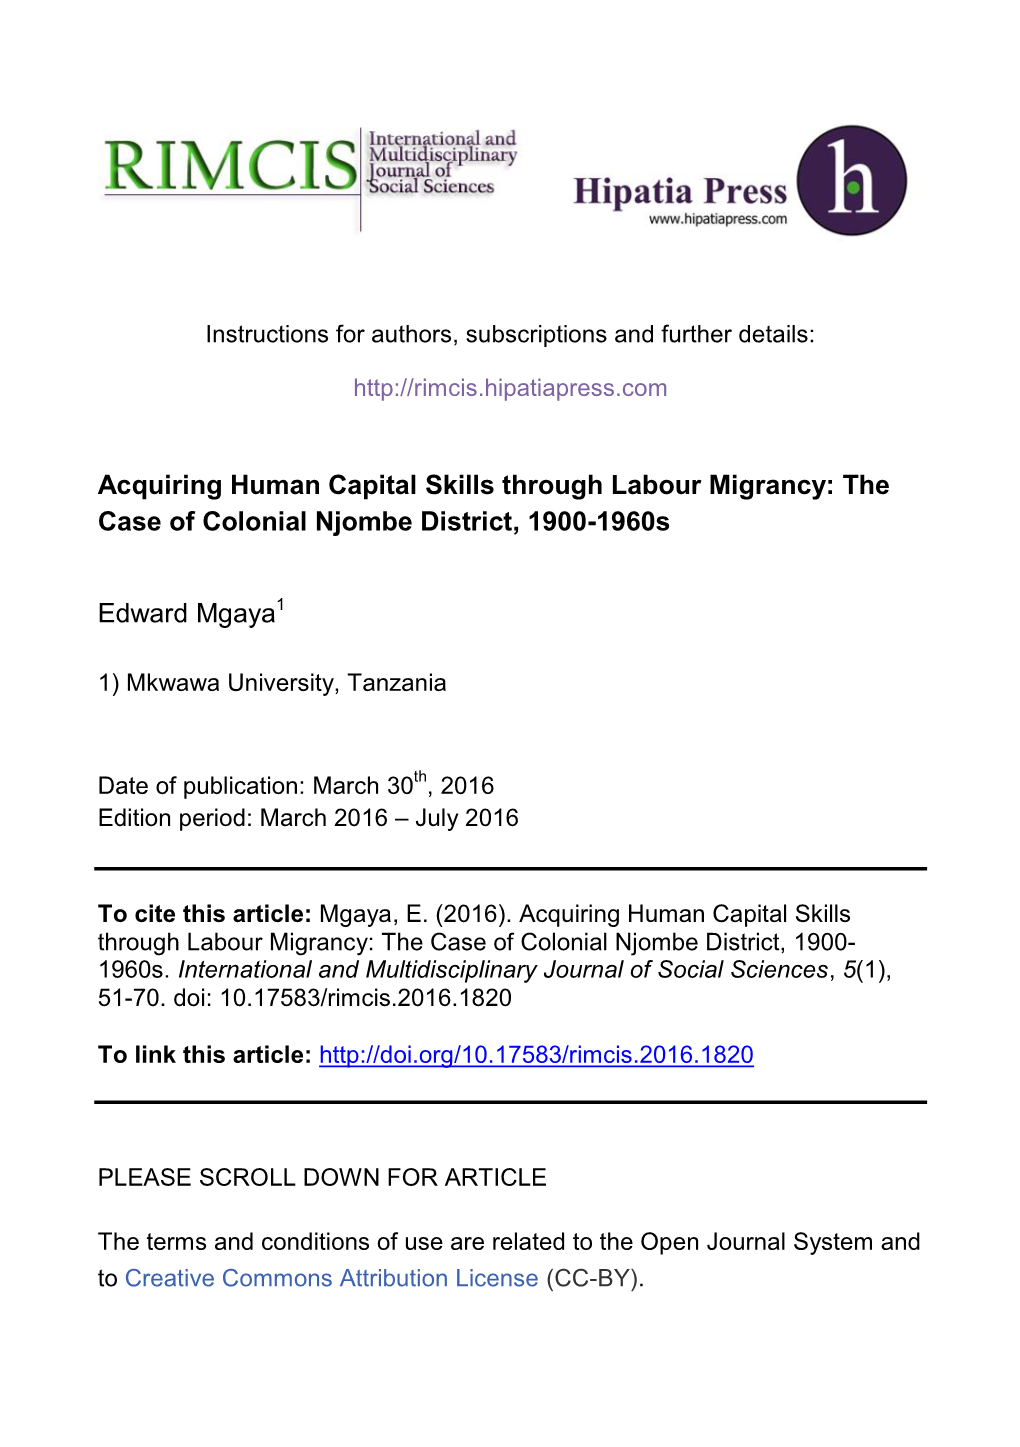 Acquiring Human Capital Skills Through Labour Migrancy: the Case of Colonial Njombe District, 1900-1960S